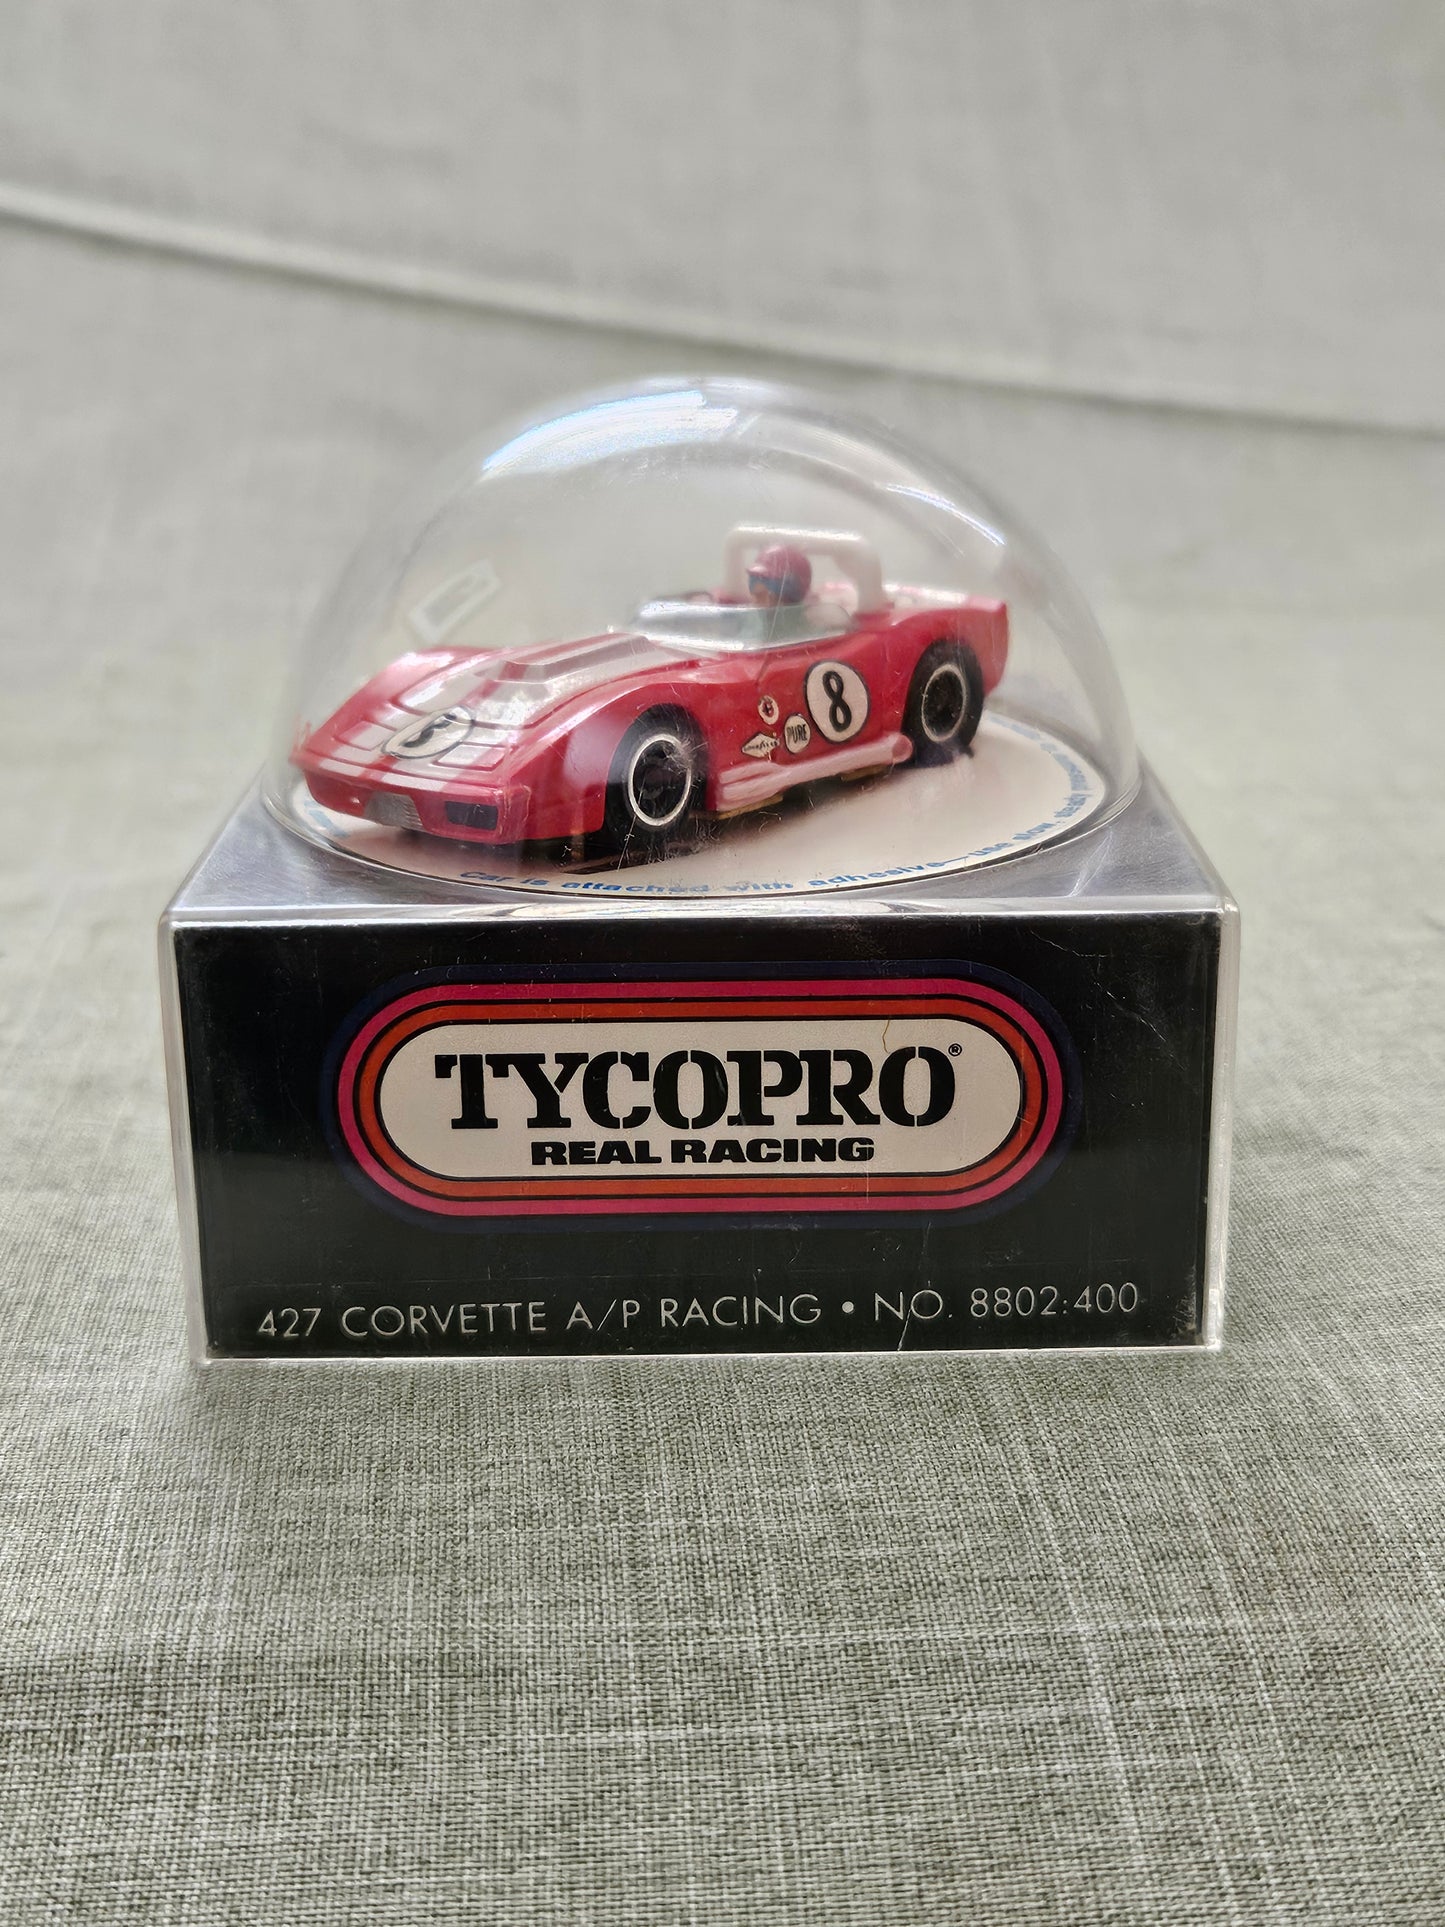 Tyco Pro Electric Racing Slot Car Vintage with Cube 427 Corvette A/P Racing 8802